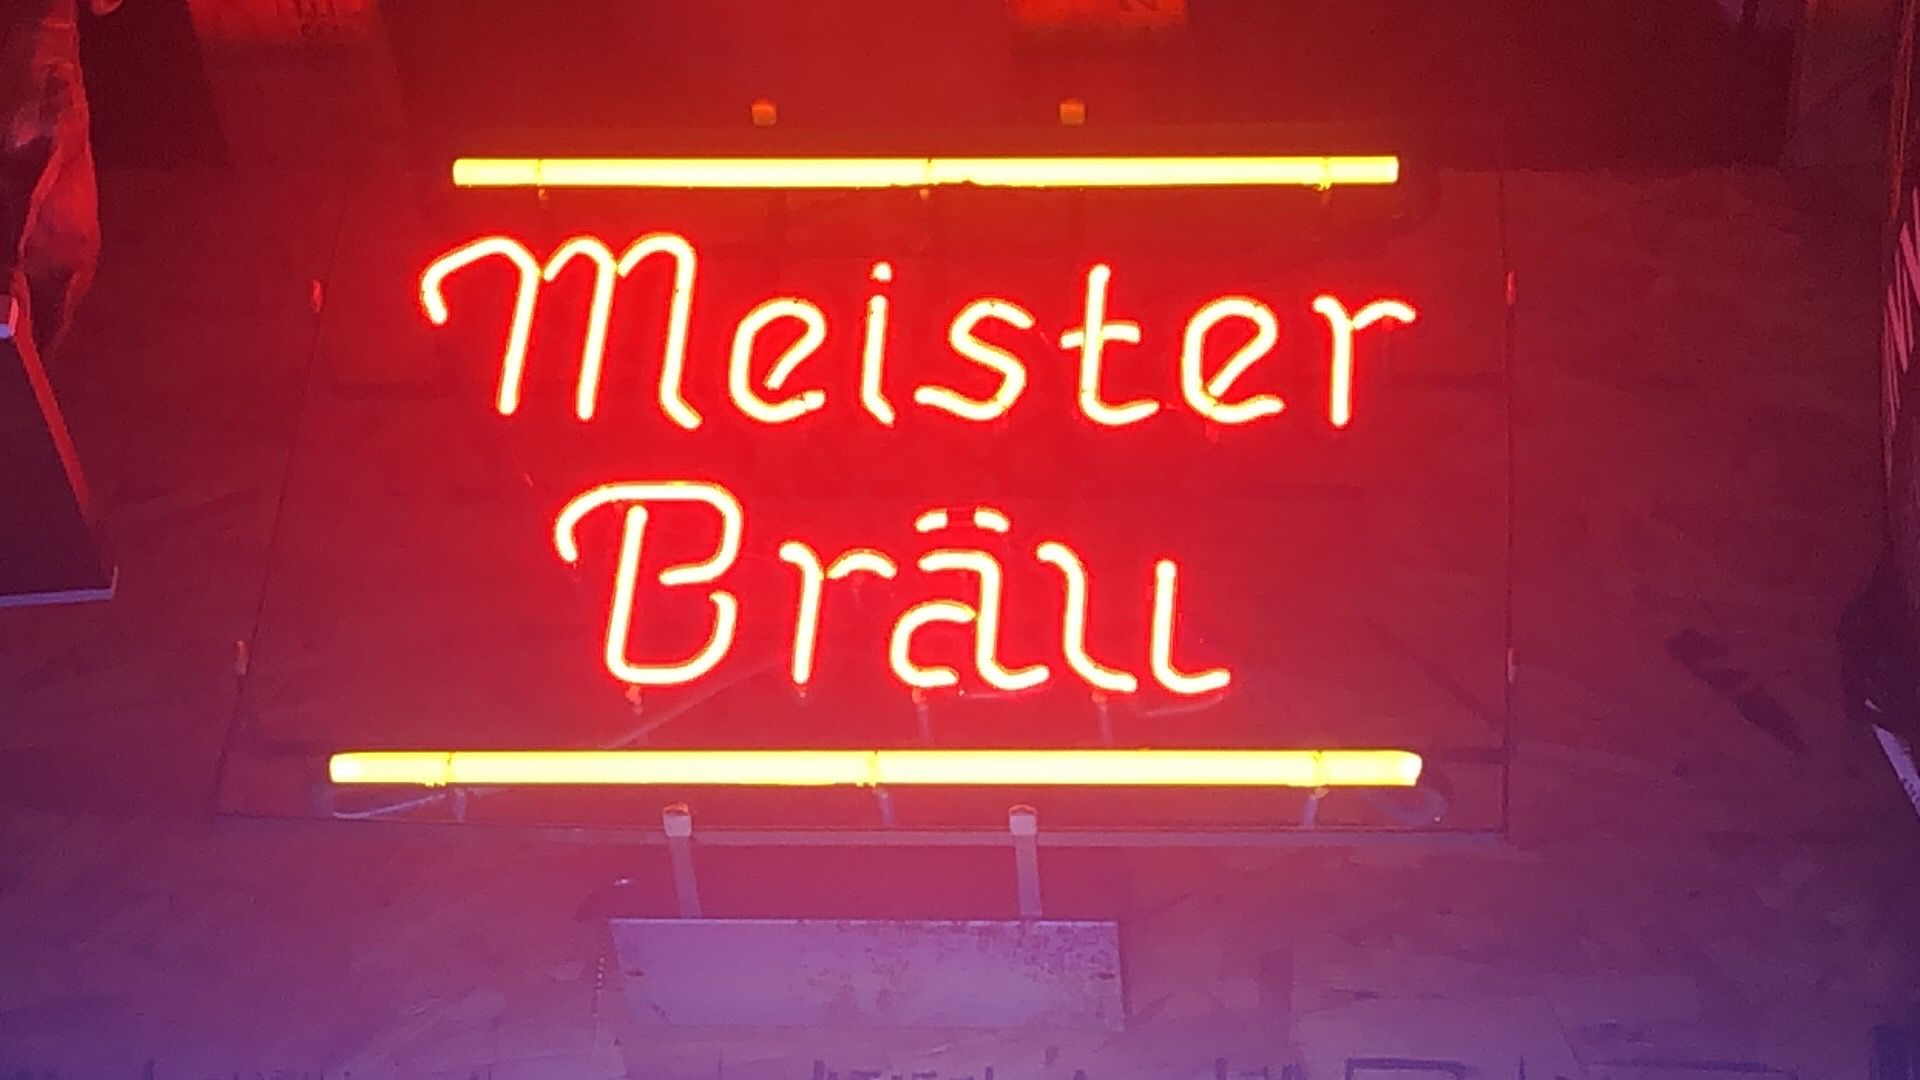 Neon beer sign / Light. No issues